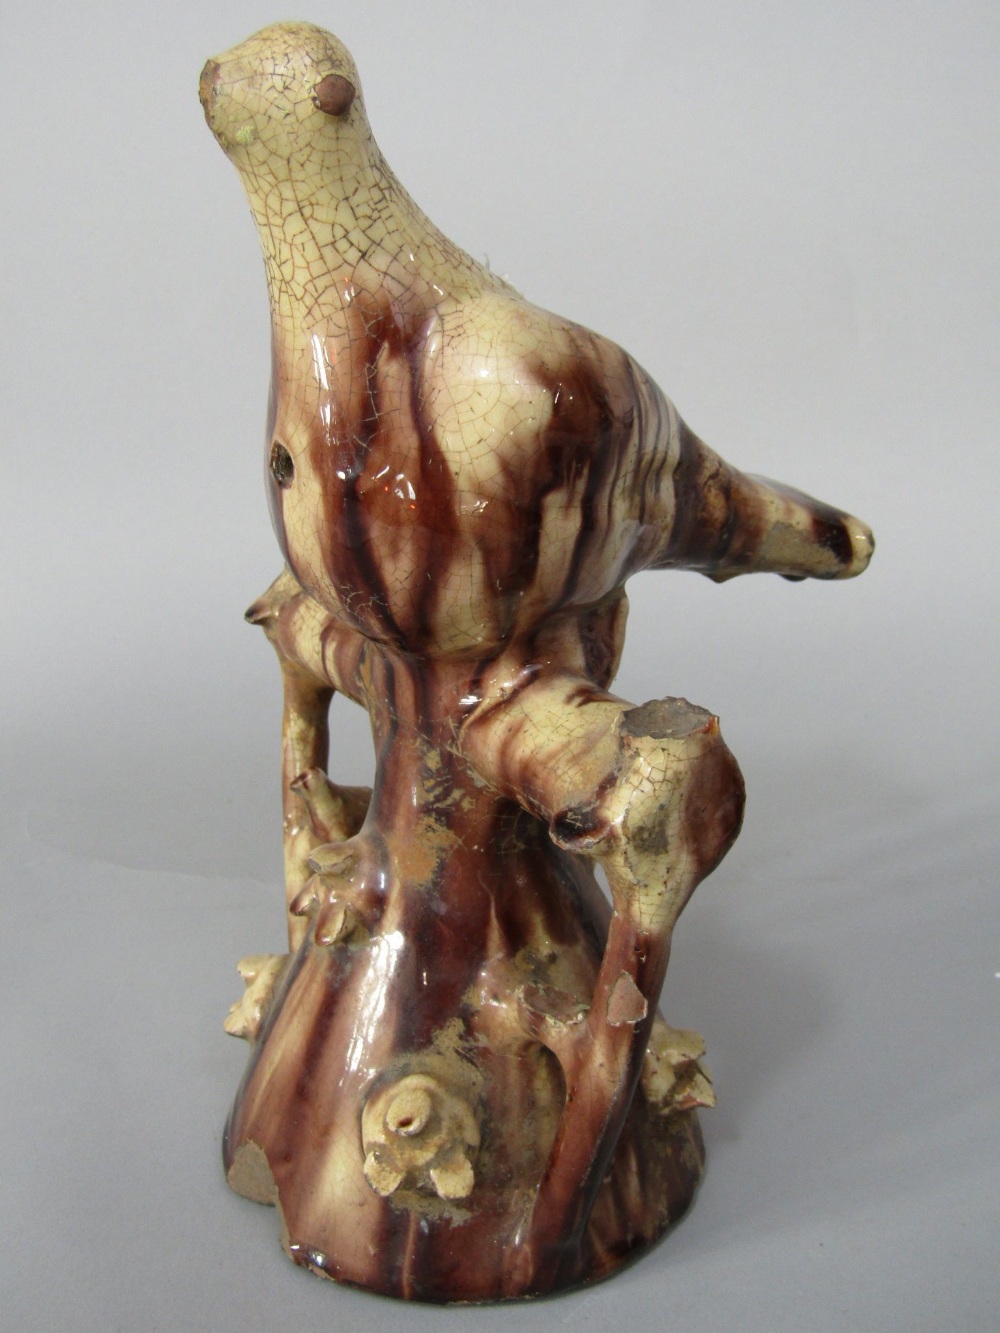 An unusual 19th century slipware pottery model of a bird/whistle with streaked brown and cream